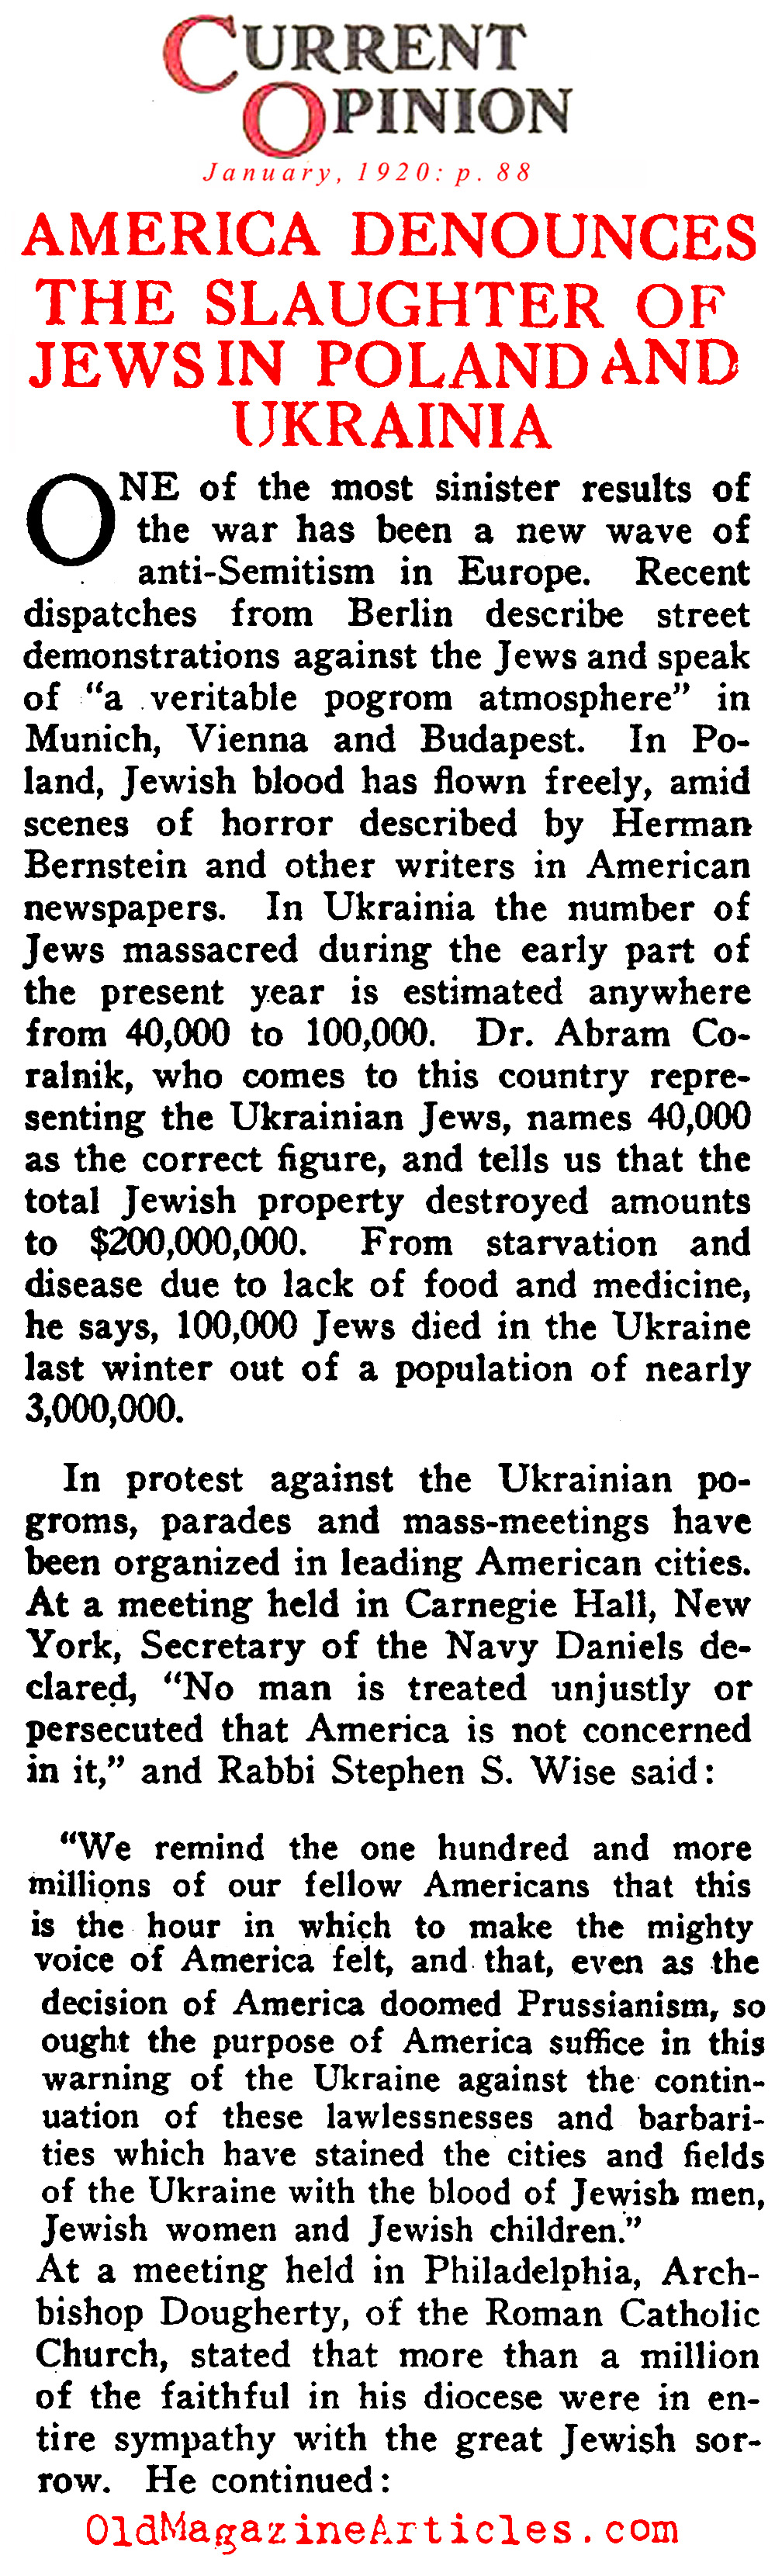 Eastern European Jews Slaughtered (Current Opinion, 1920)